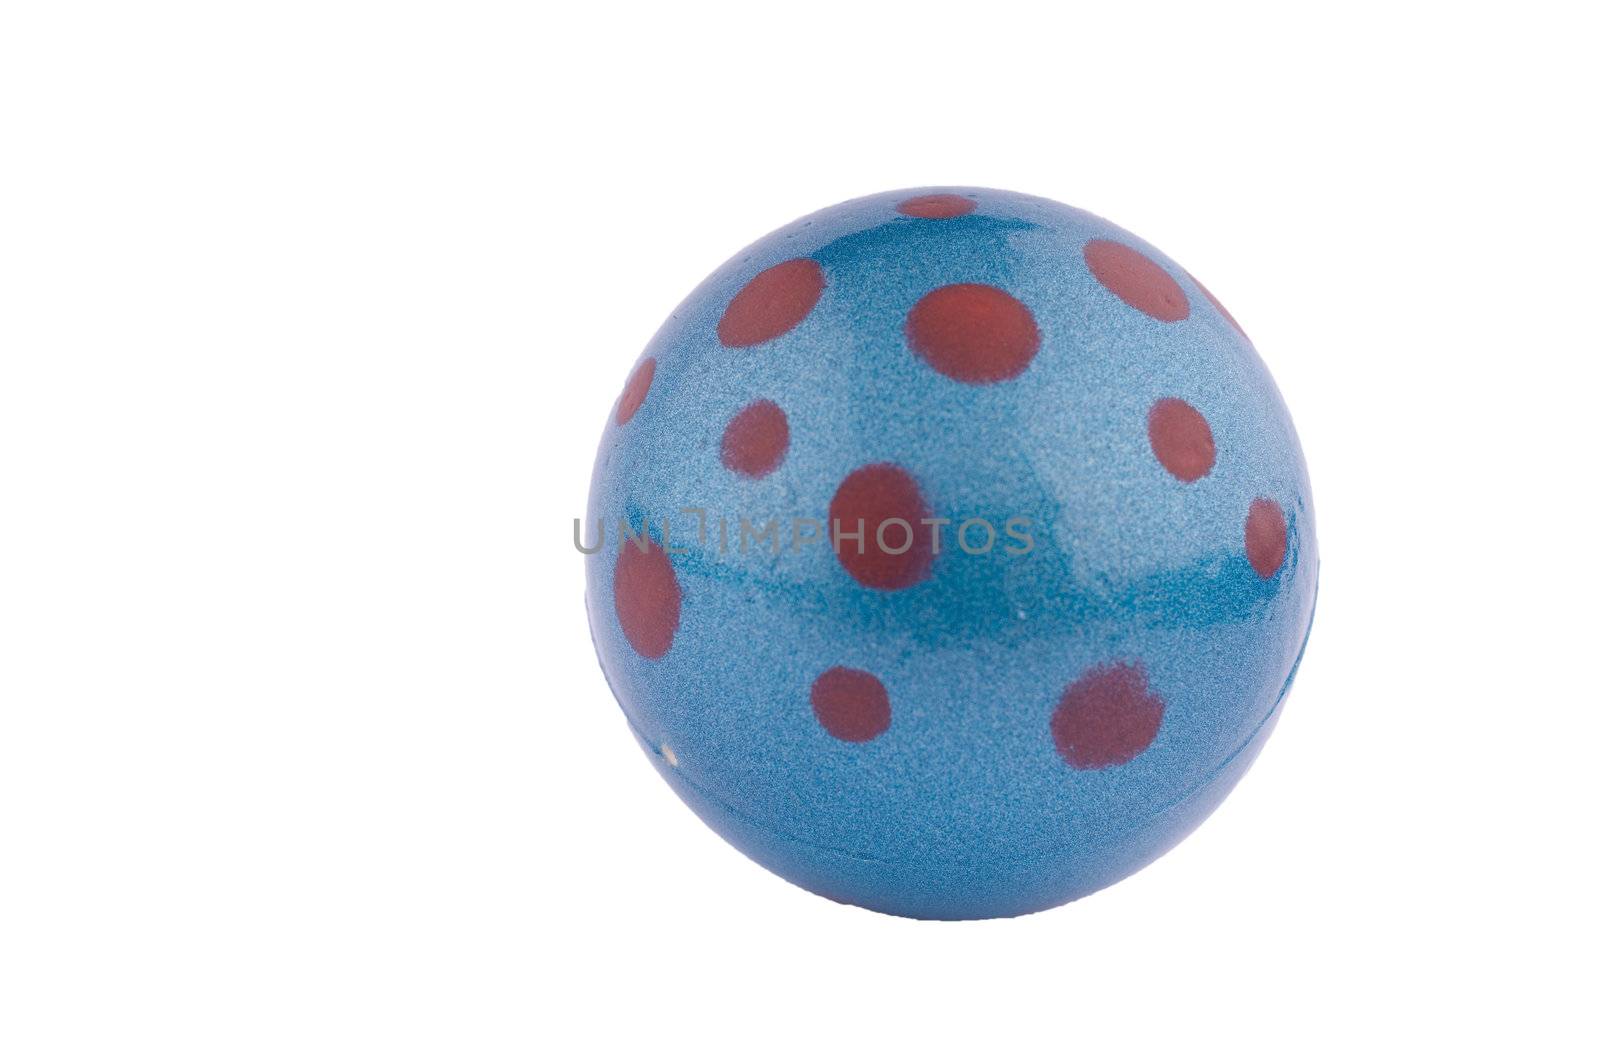 Shiny blue rubber ball with red dots on white